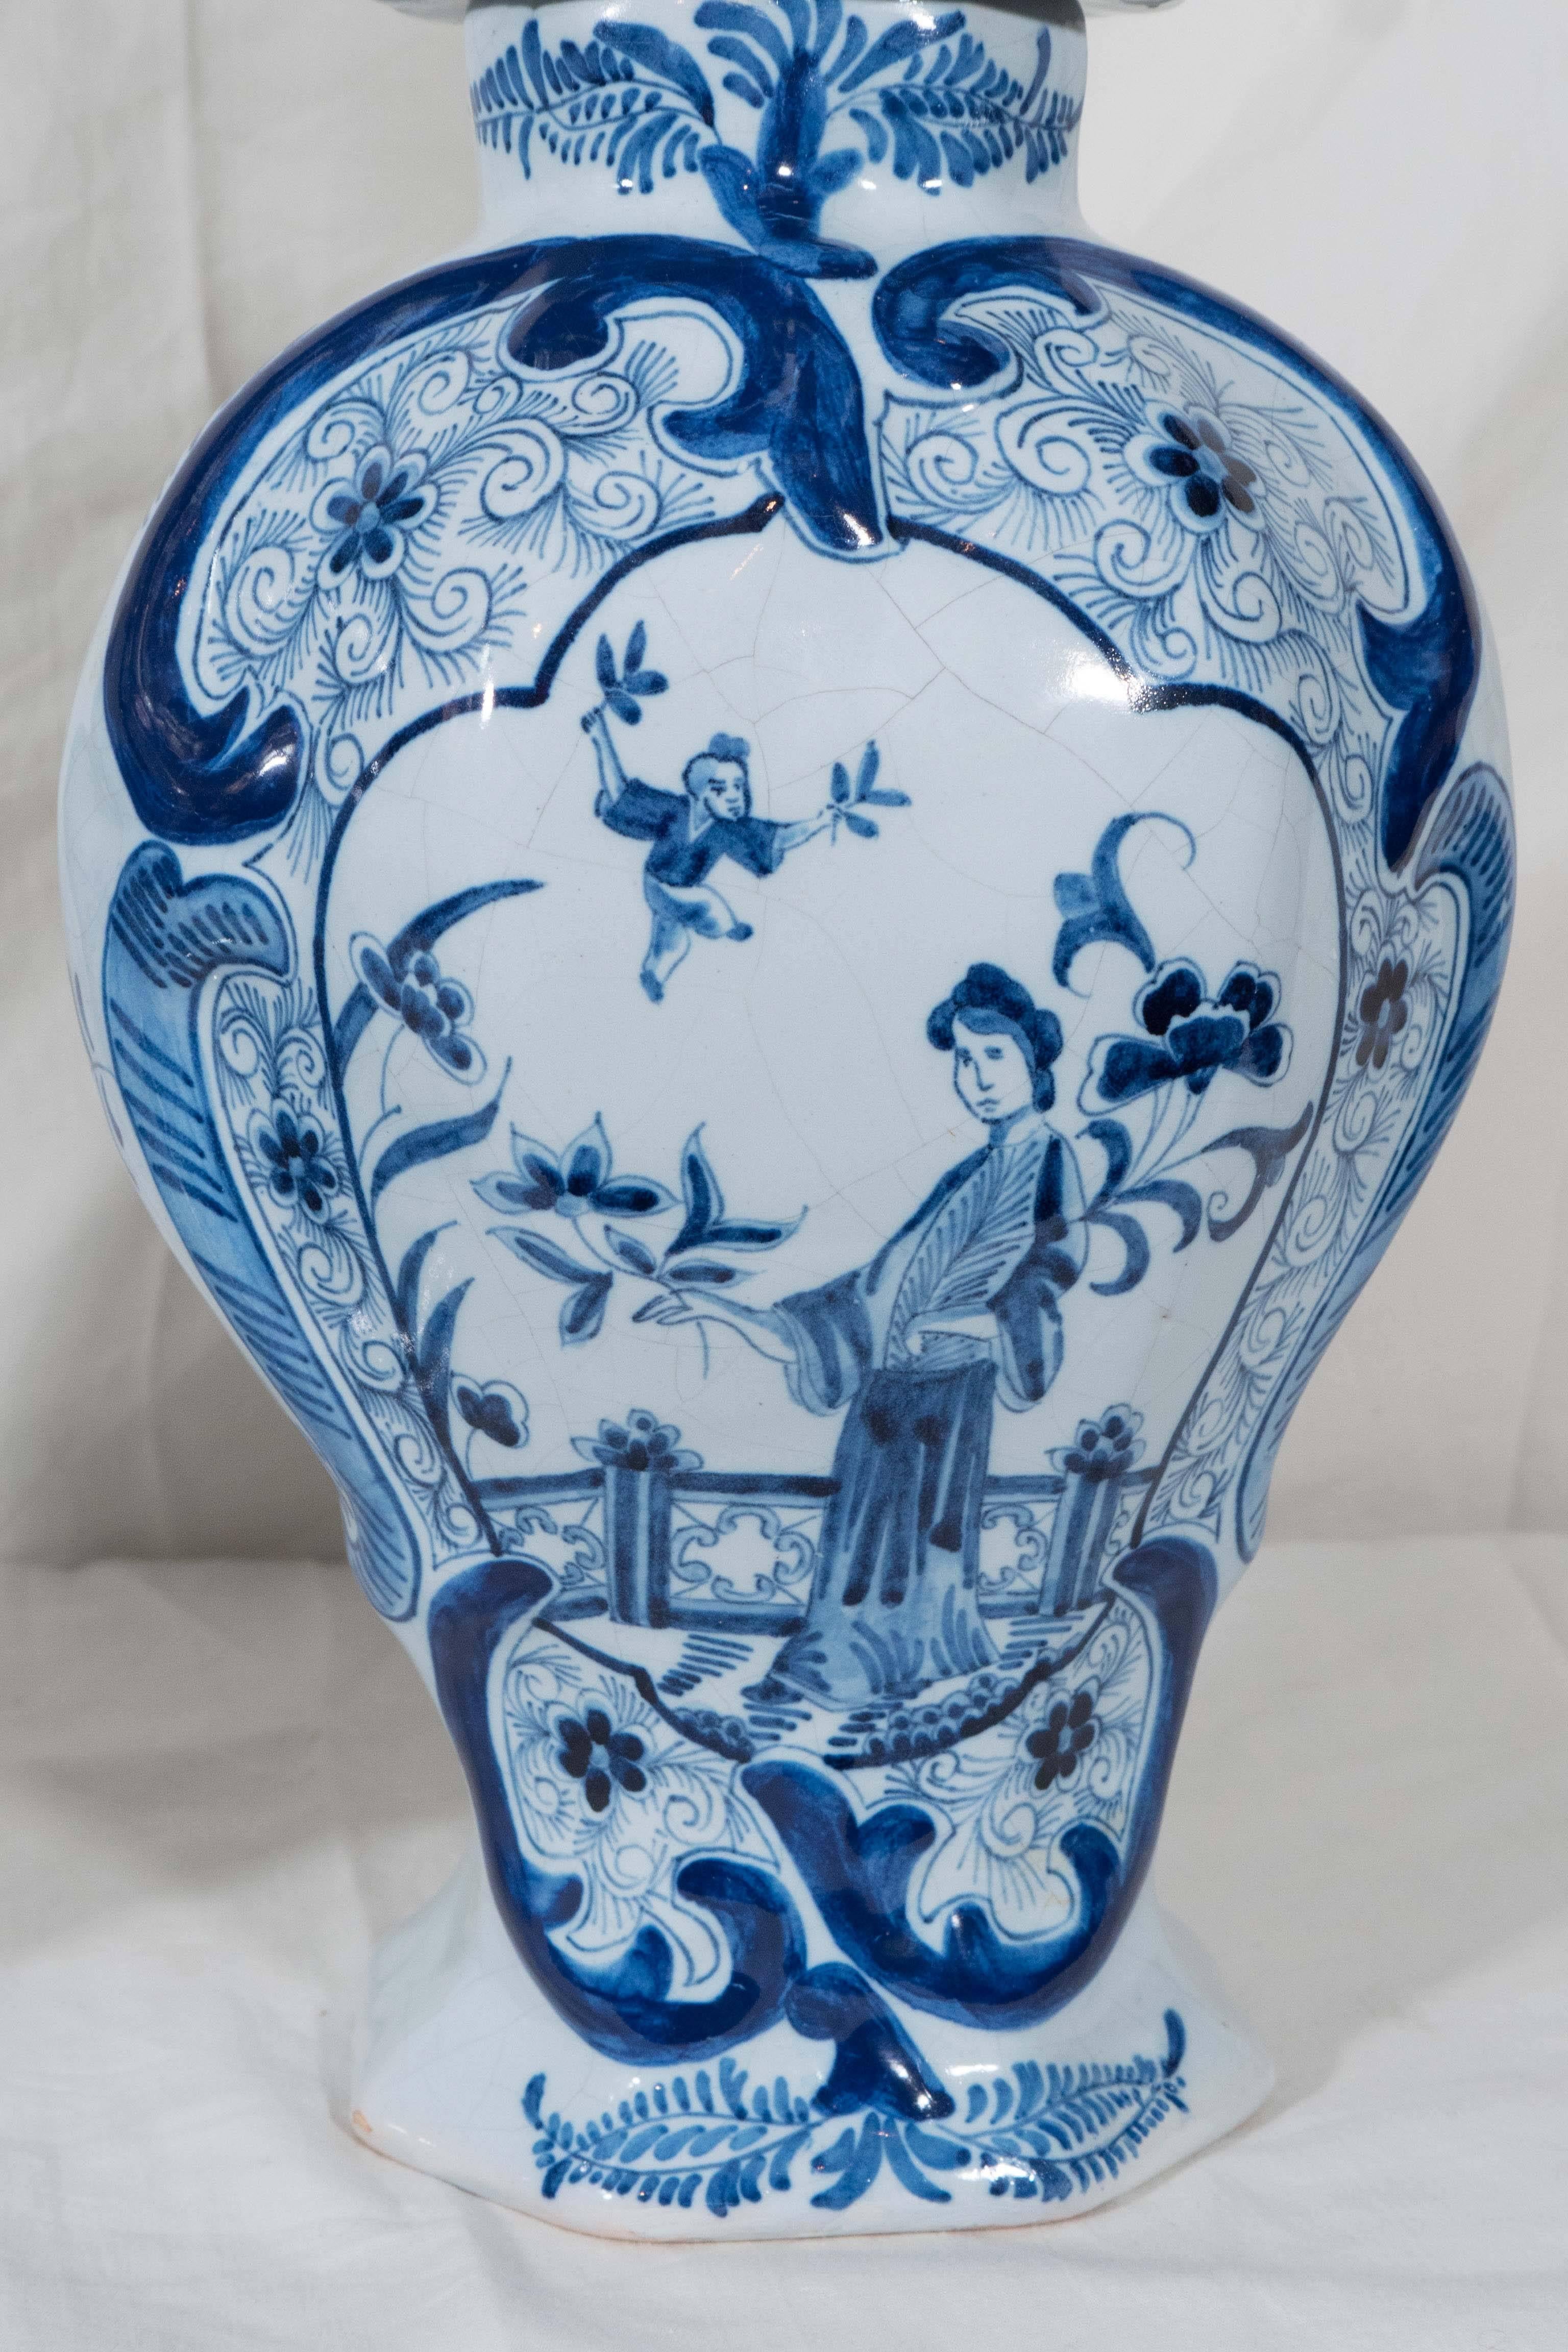 A pair of Dutch delft blue and white covered vases decorated in shades of cobalt blue with a chinoiserie design showing a young woman, a 